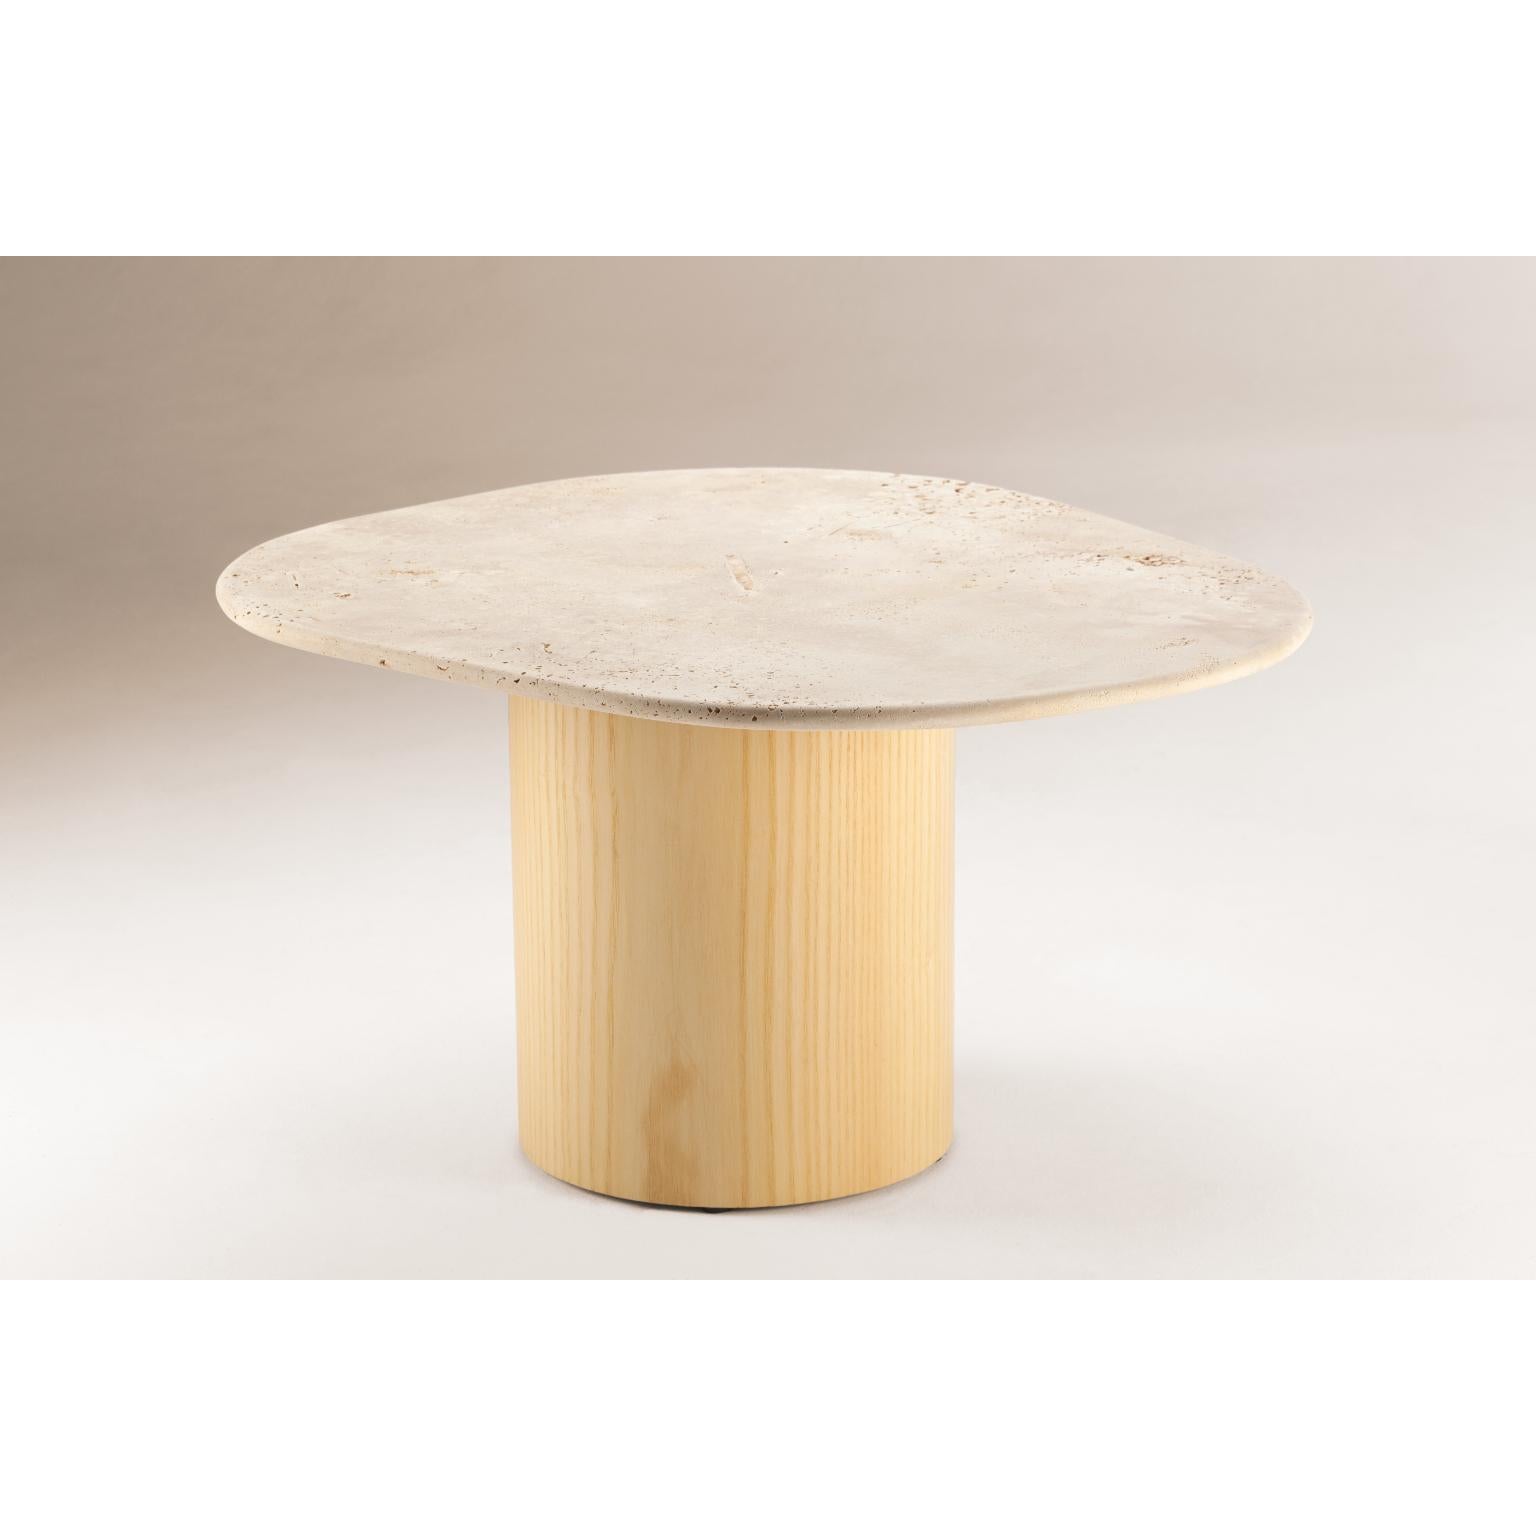 L’anamour side table by Dooq
Dimensions: W 72 x D 24 x H 40 cm
Materials: 
Top: Natural or Red Travertine
Base: Natural Ash or Nude Lacquered Wood

Other options available.

L’anamour is a set of coffee and side tables, which complement and